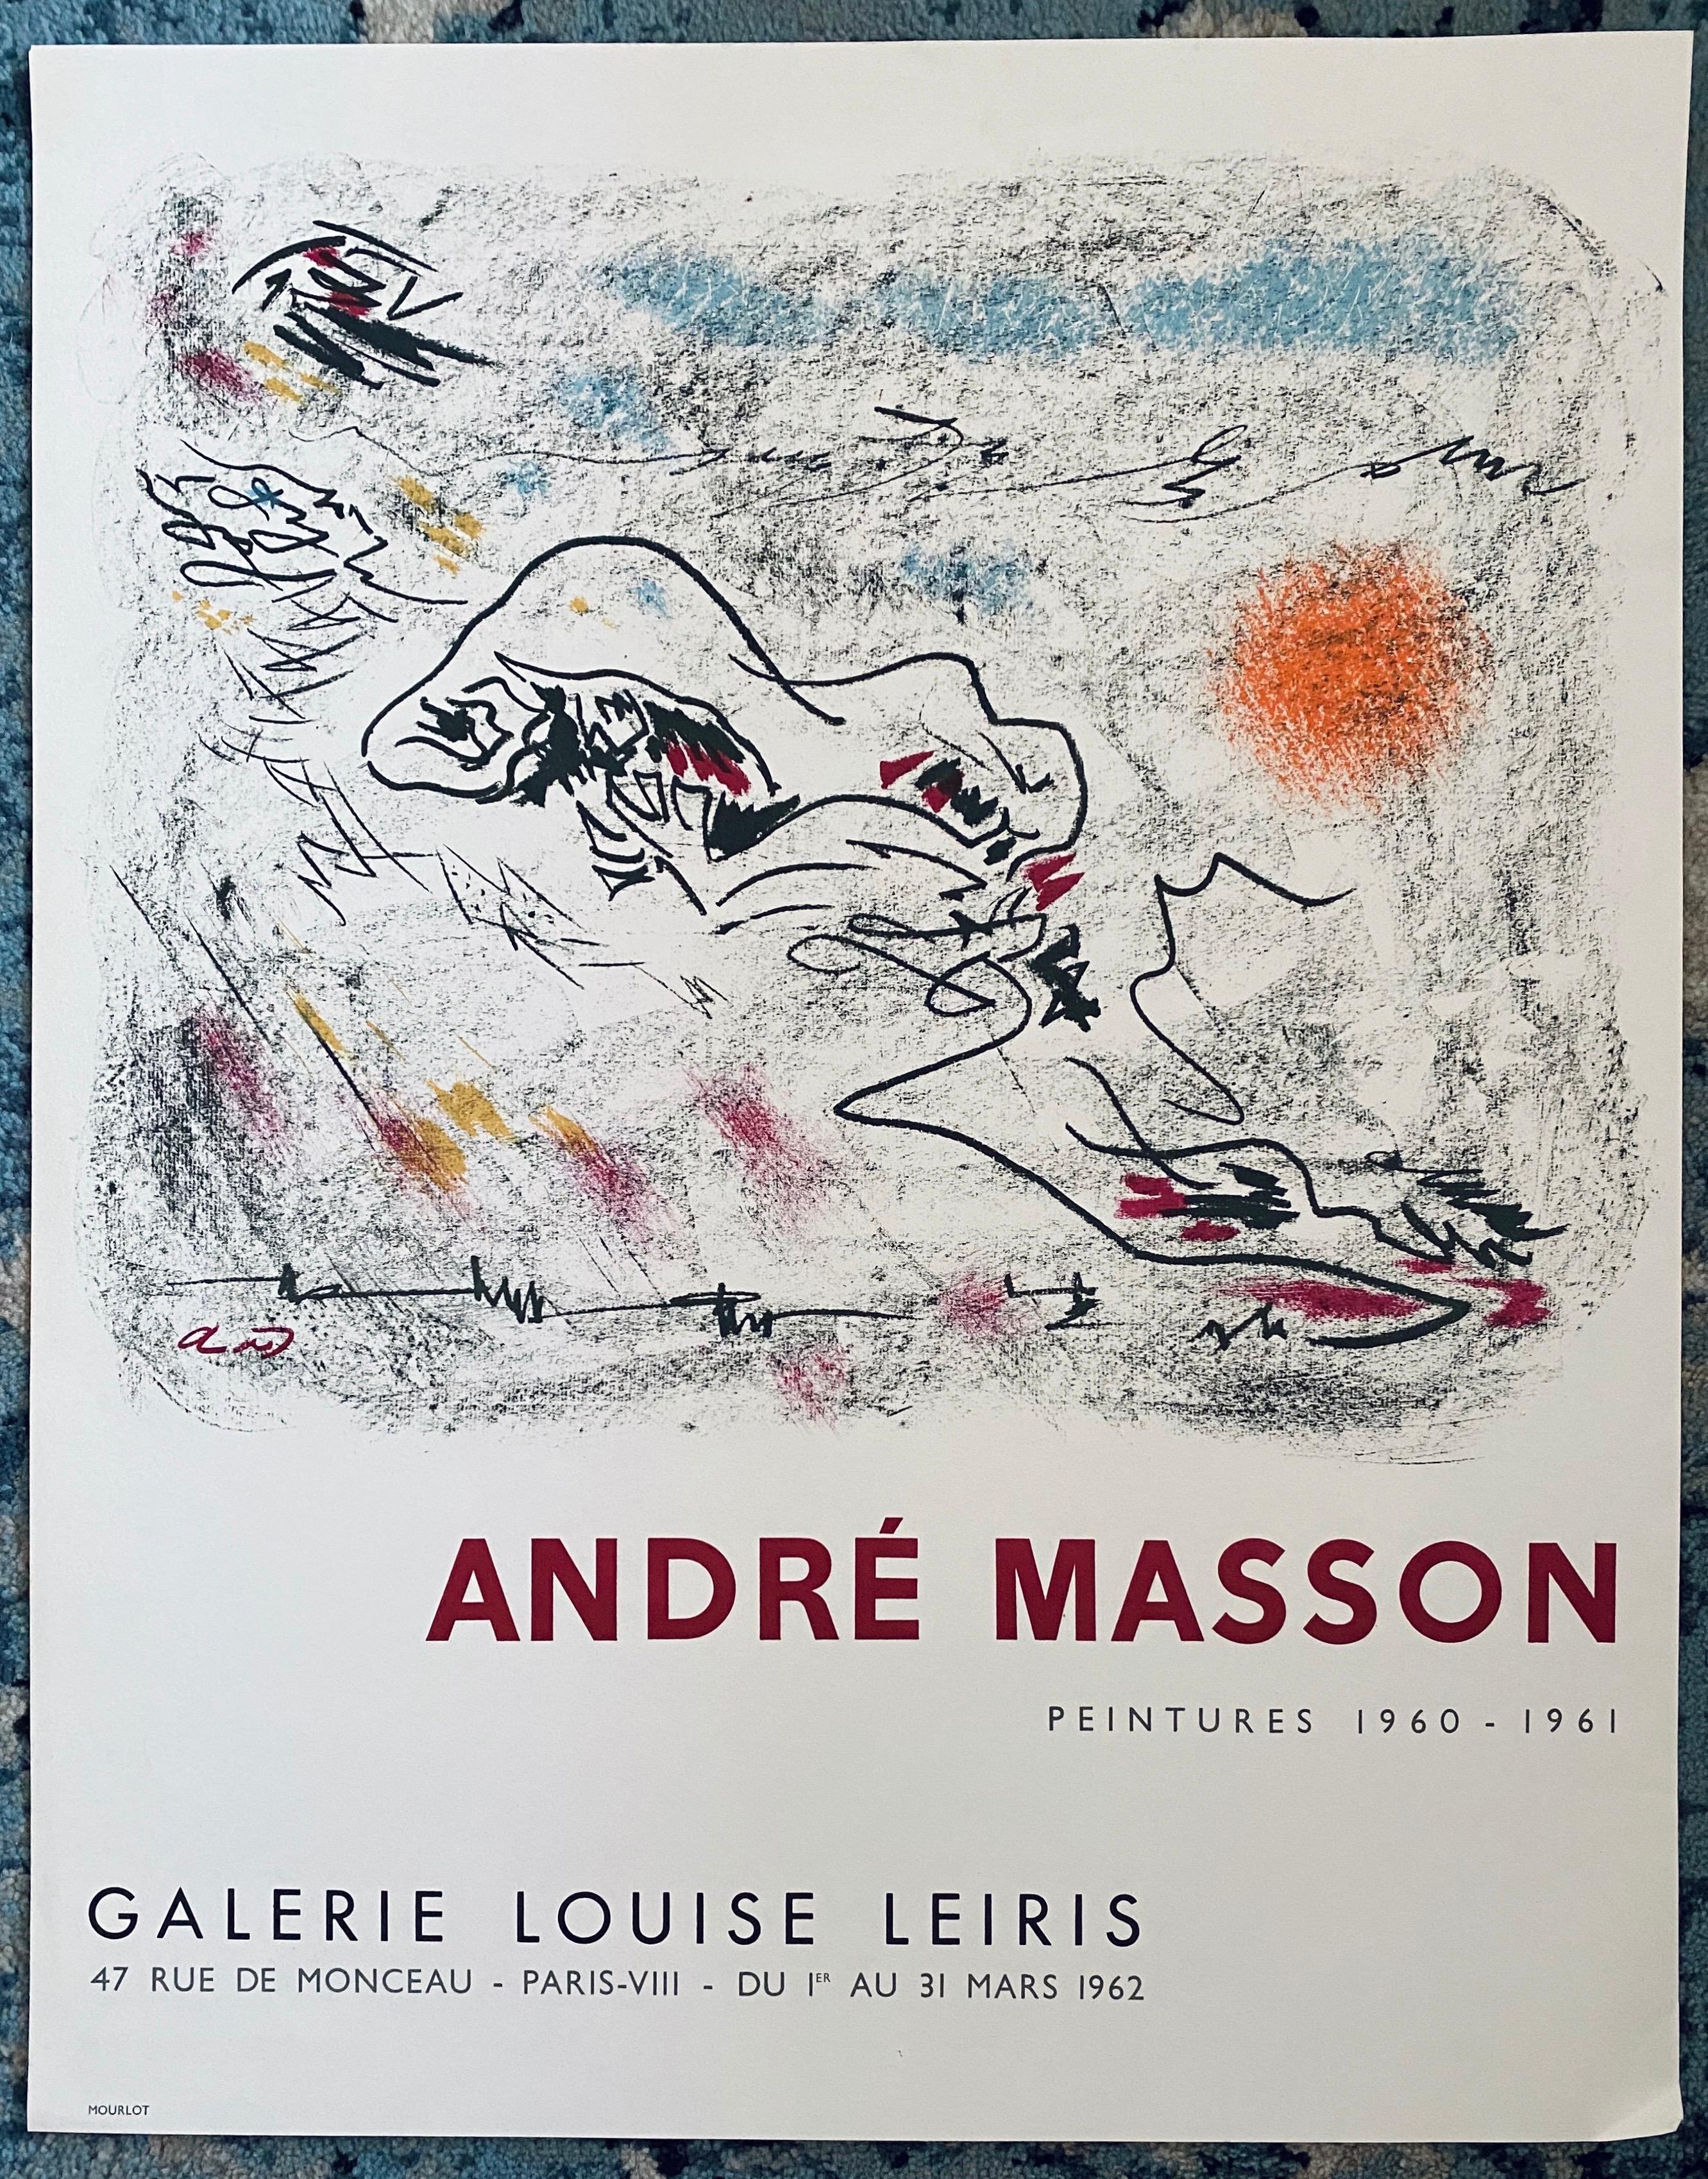 French Abstract Surrealist Vintage Lithograph Mourlot Poster Andre Masson - Painting by André Masson